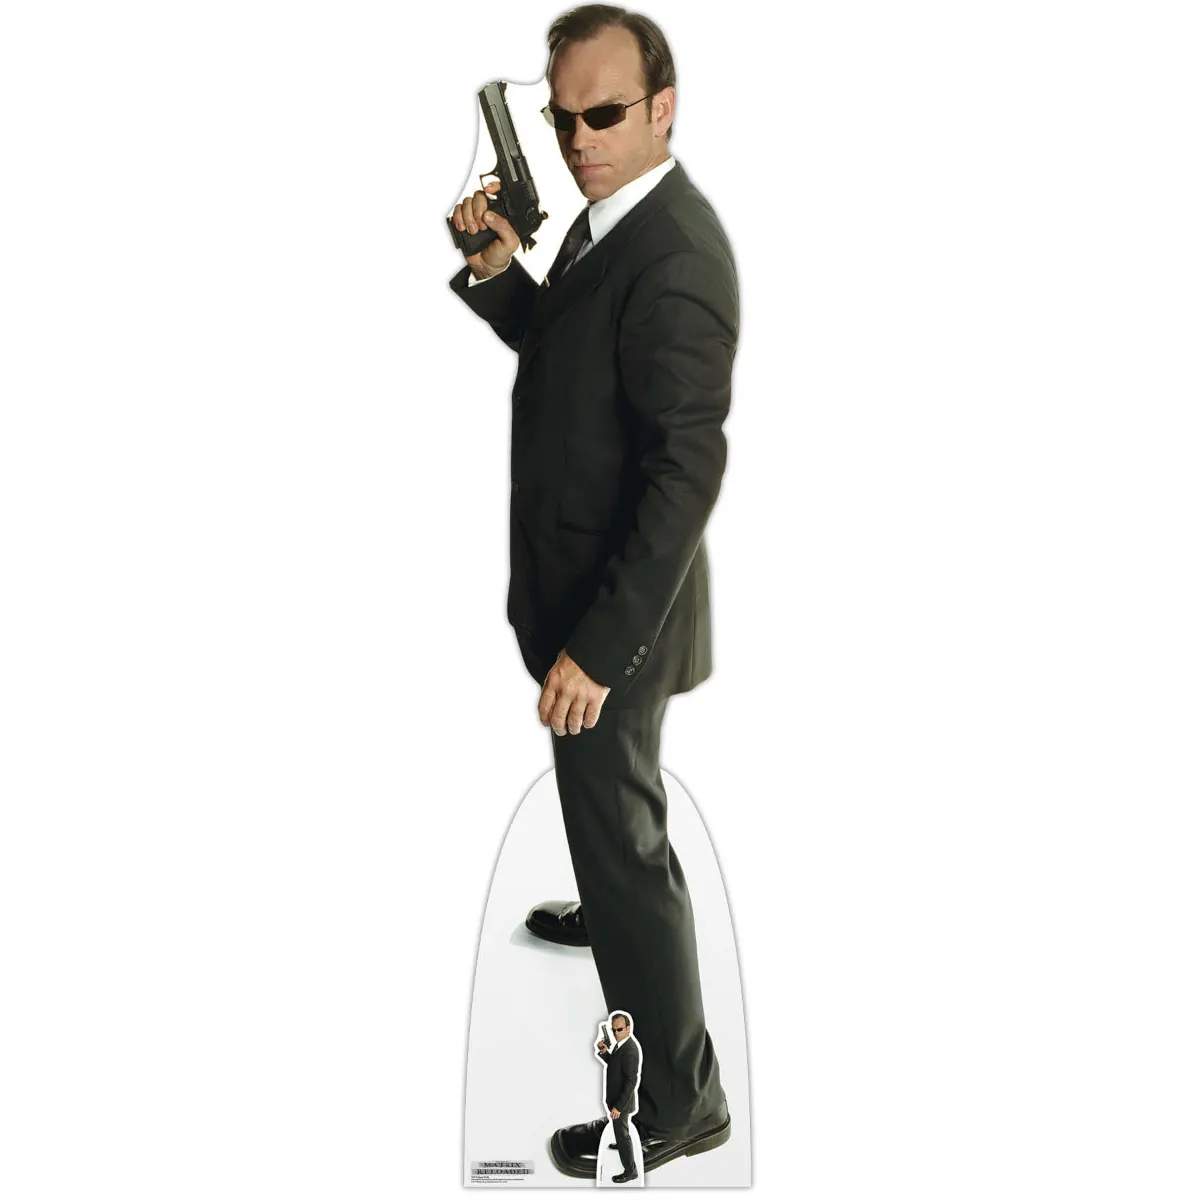 SC4116 Agent Smith 'Hugo Weaving' (The Matrix Reloaded) Lifesize + Mini Cardboard Cutout Standee Front